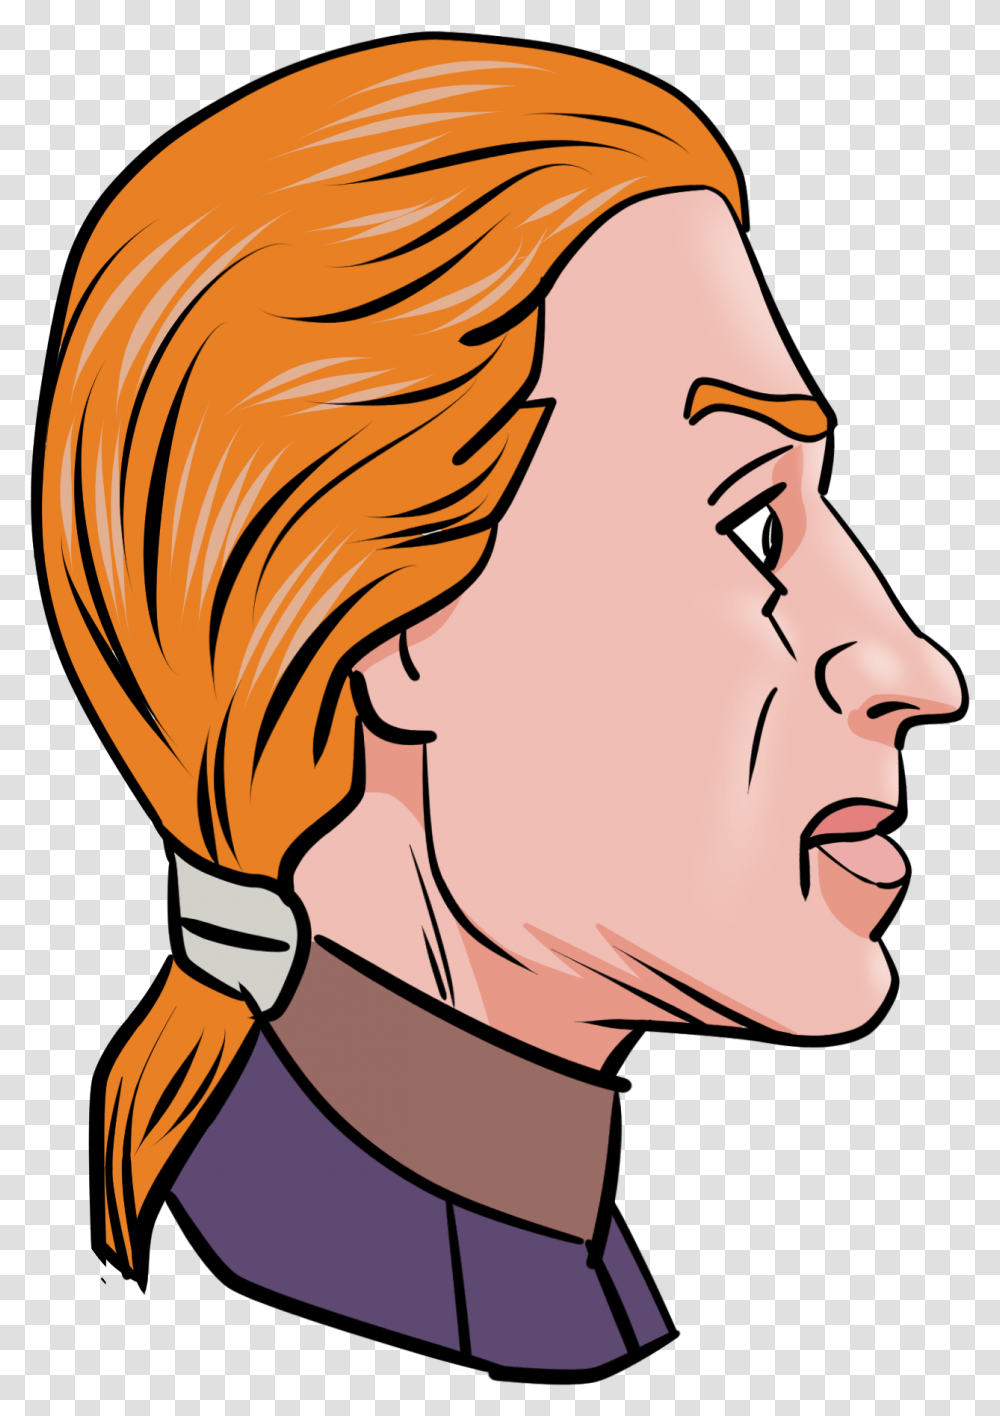 After Some Tough Times Thomas Jefferson Needed An Thomas Jeffersonclipart, Face, Head, Ear, Jaw Transparent Png